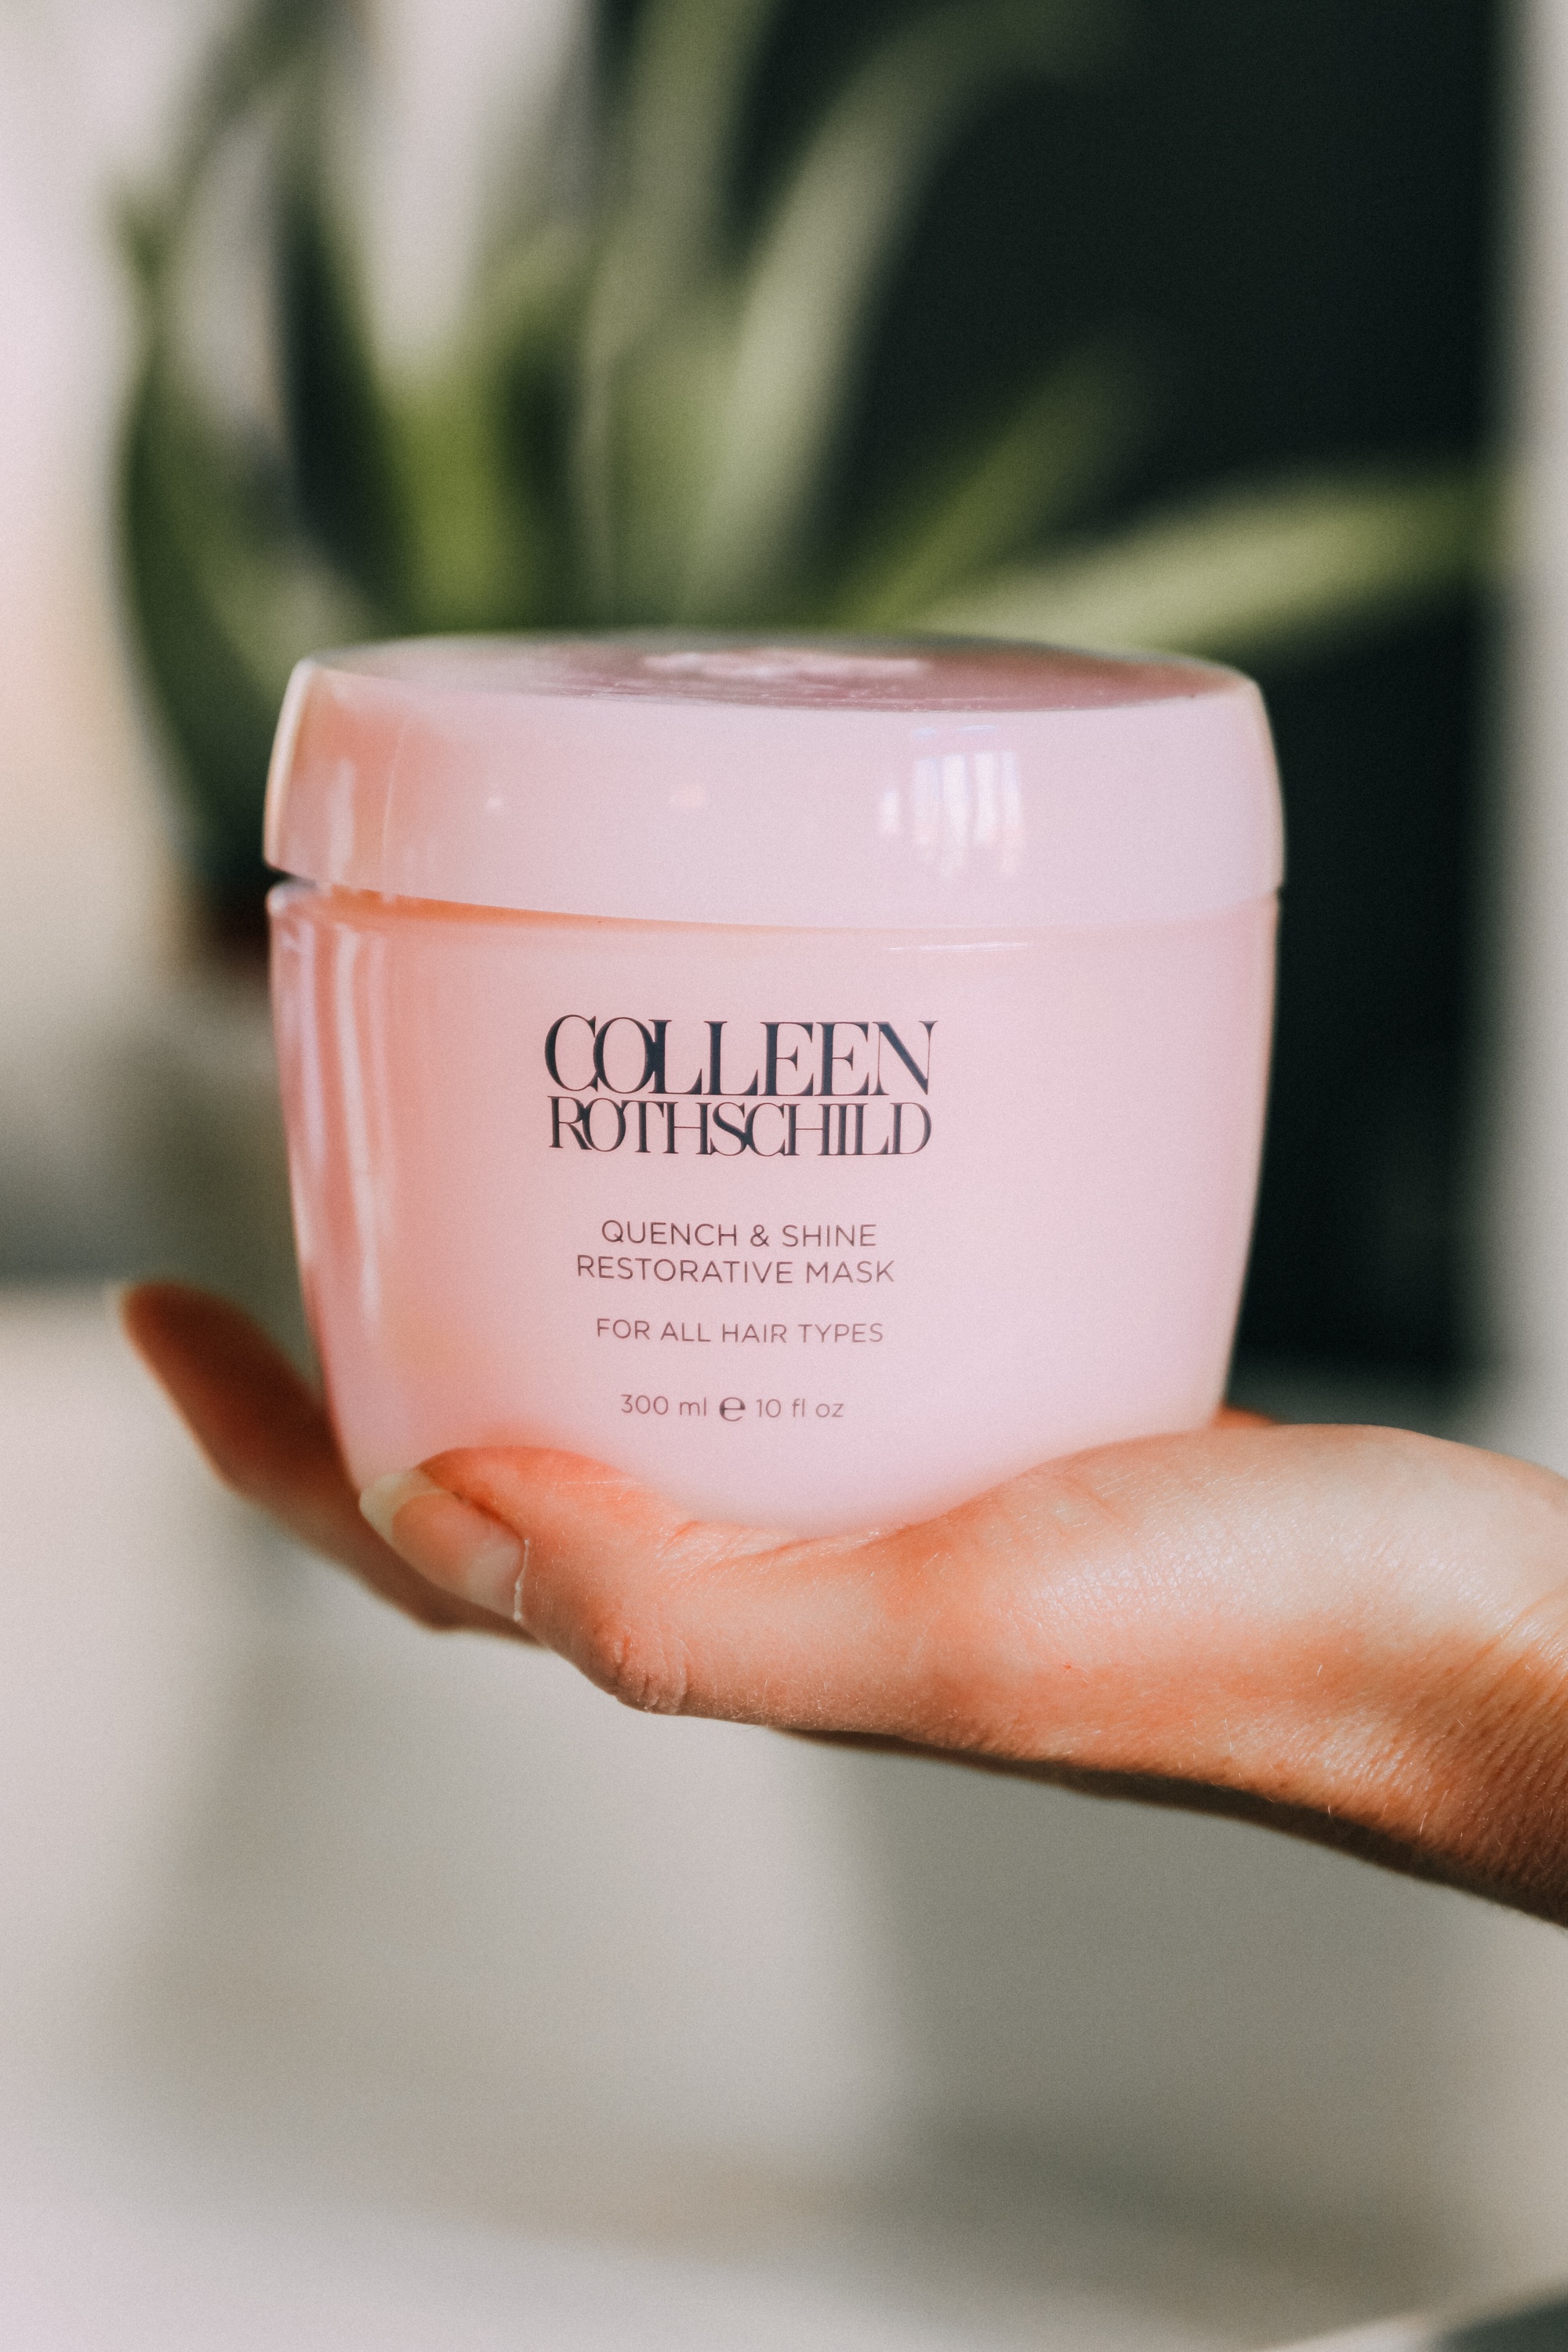 Gifts From Colleen Rothschild, Quench & Shine Restorative Hair Mask in pink Colleen Rothschild packaging